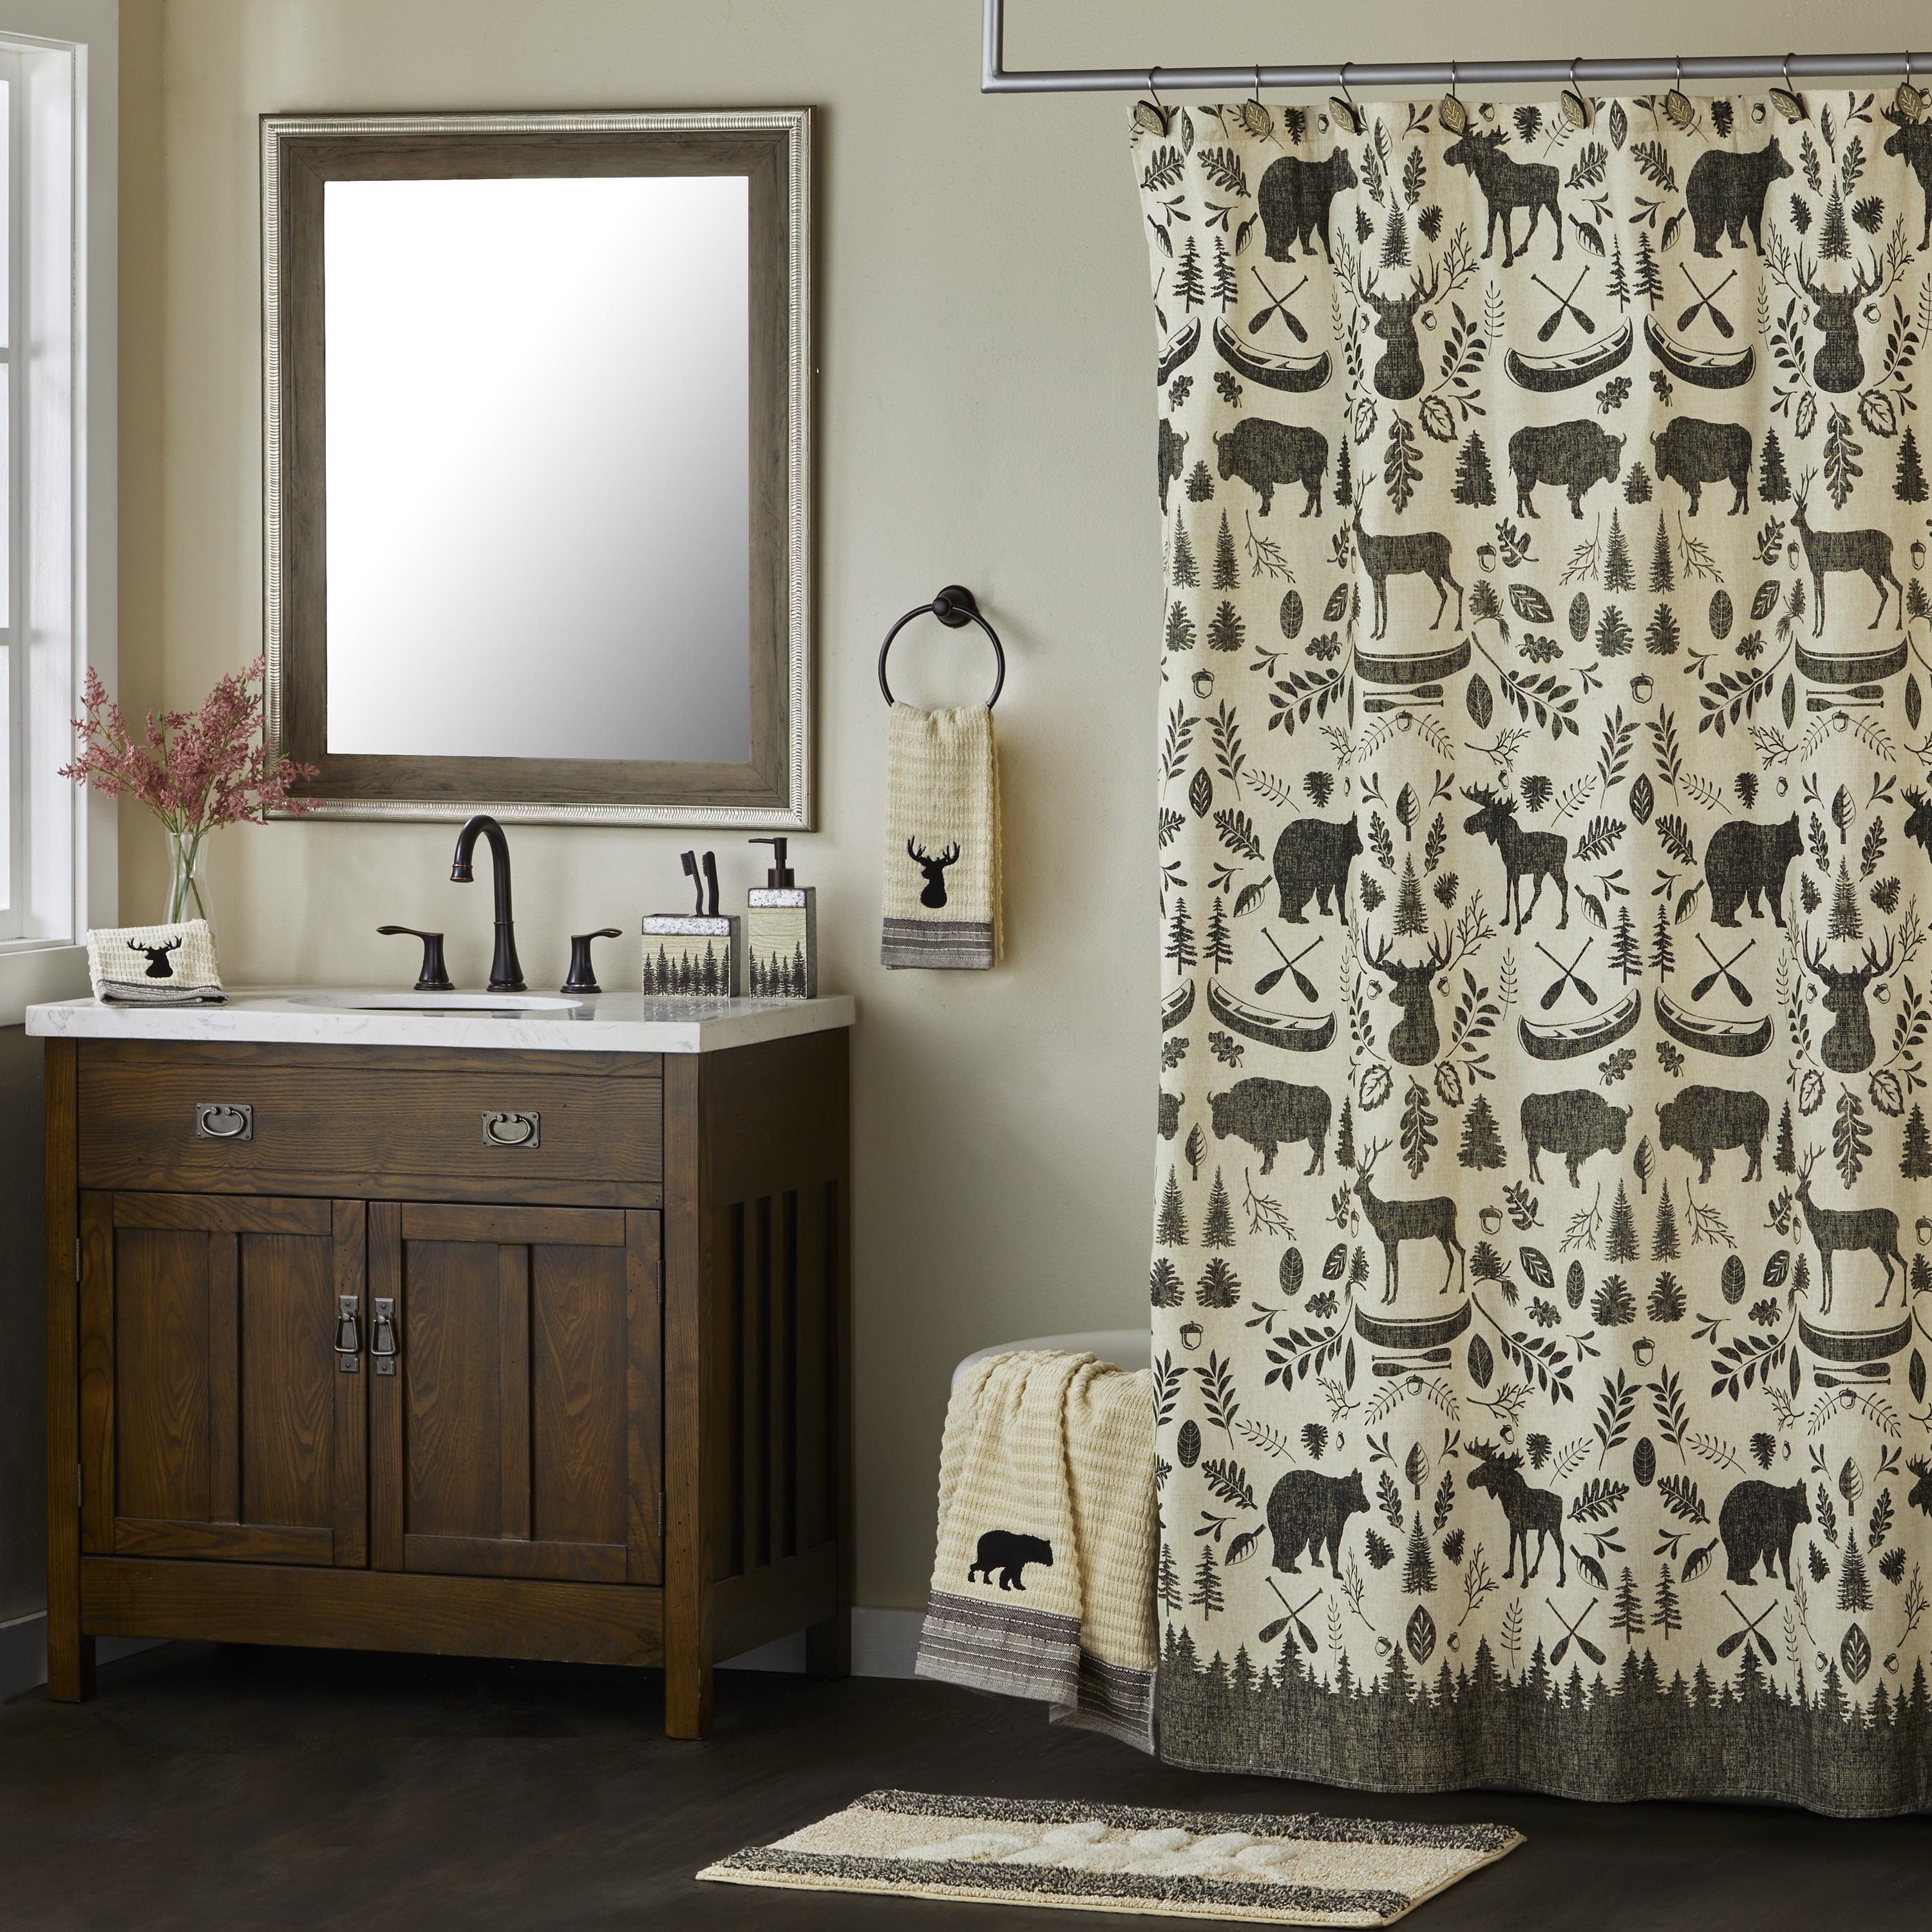 Modern Rustic,70"x72-NEW Cabin Pine Wildlife Lodge Forest Fabric Shower Curtain 